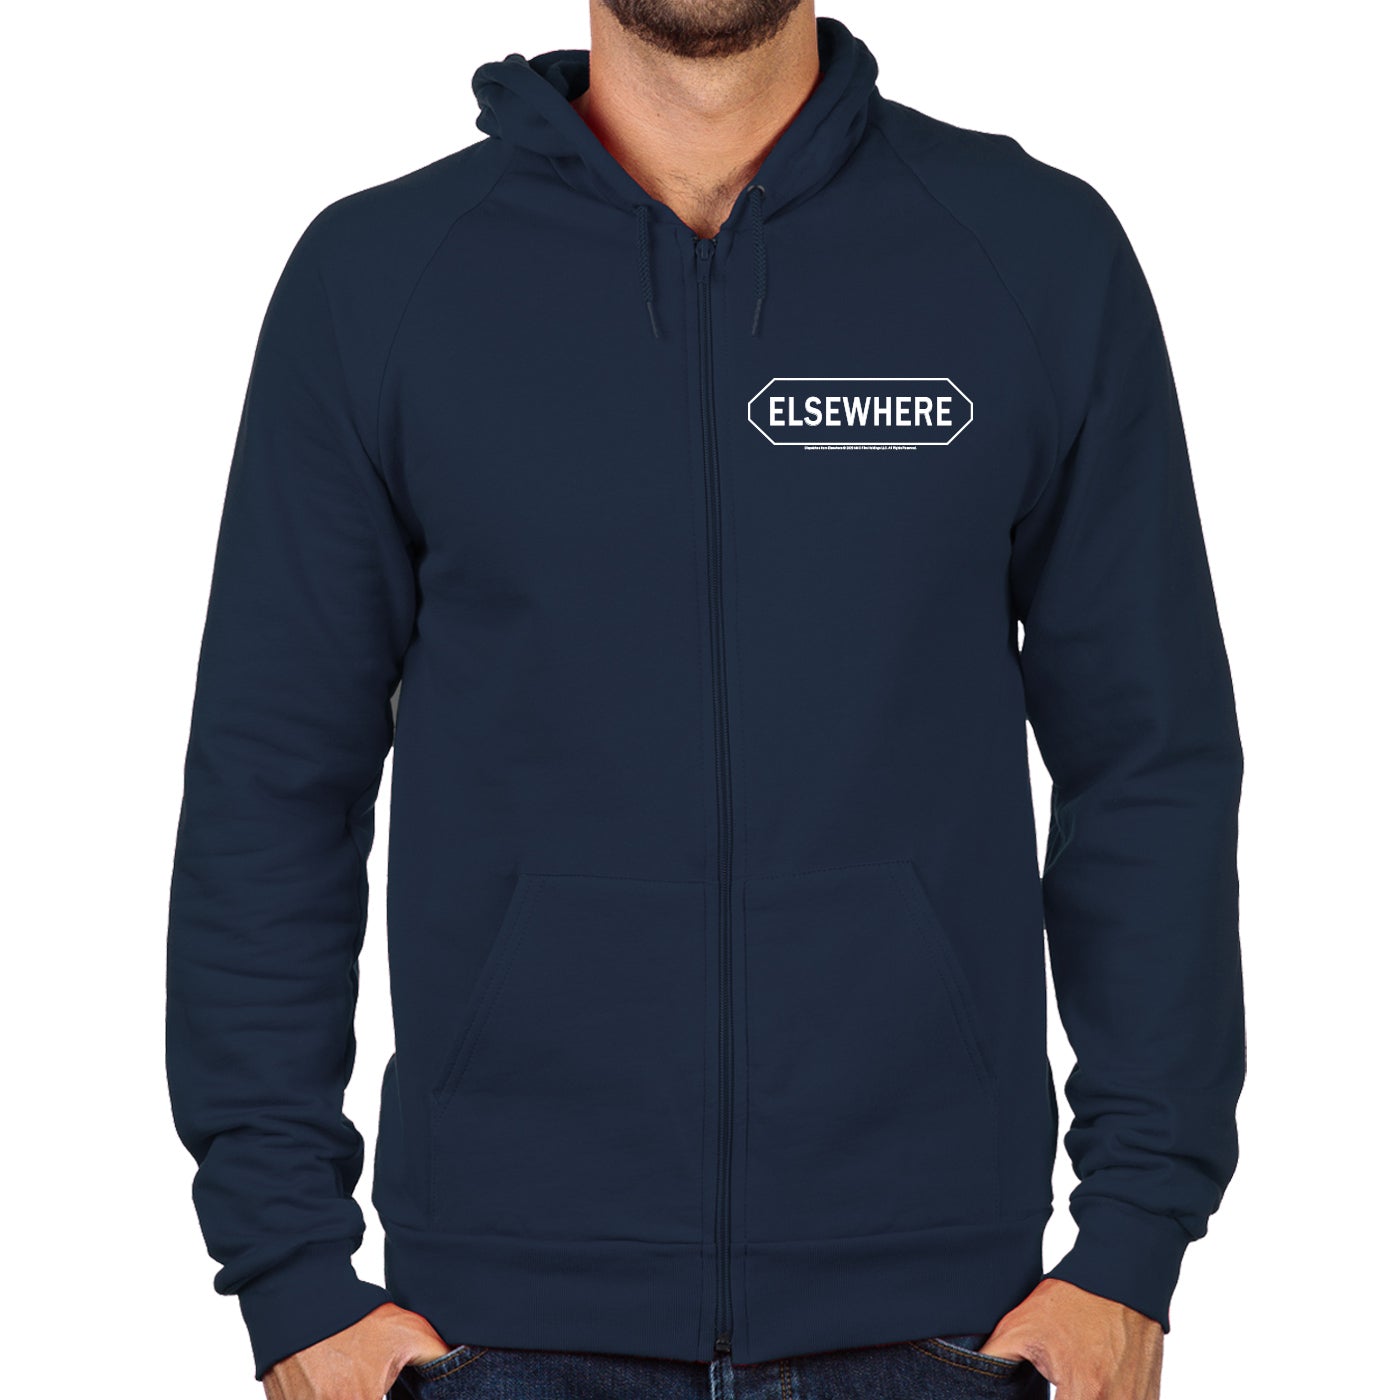 Dispatches From Elsewhere Elsewhere Zip Hoodie